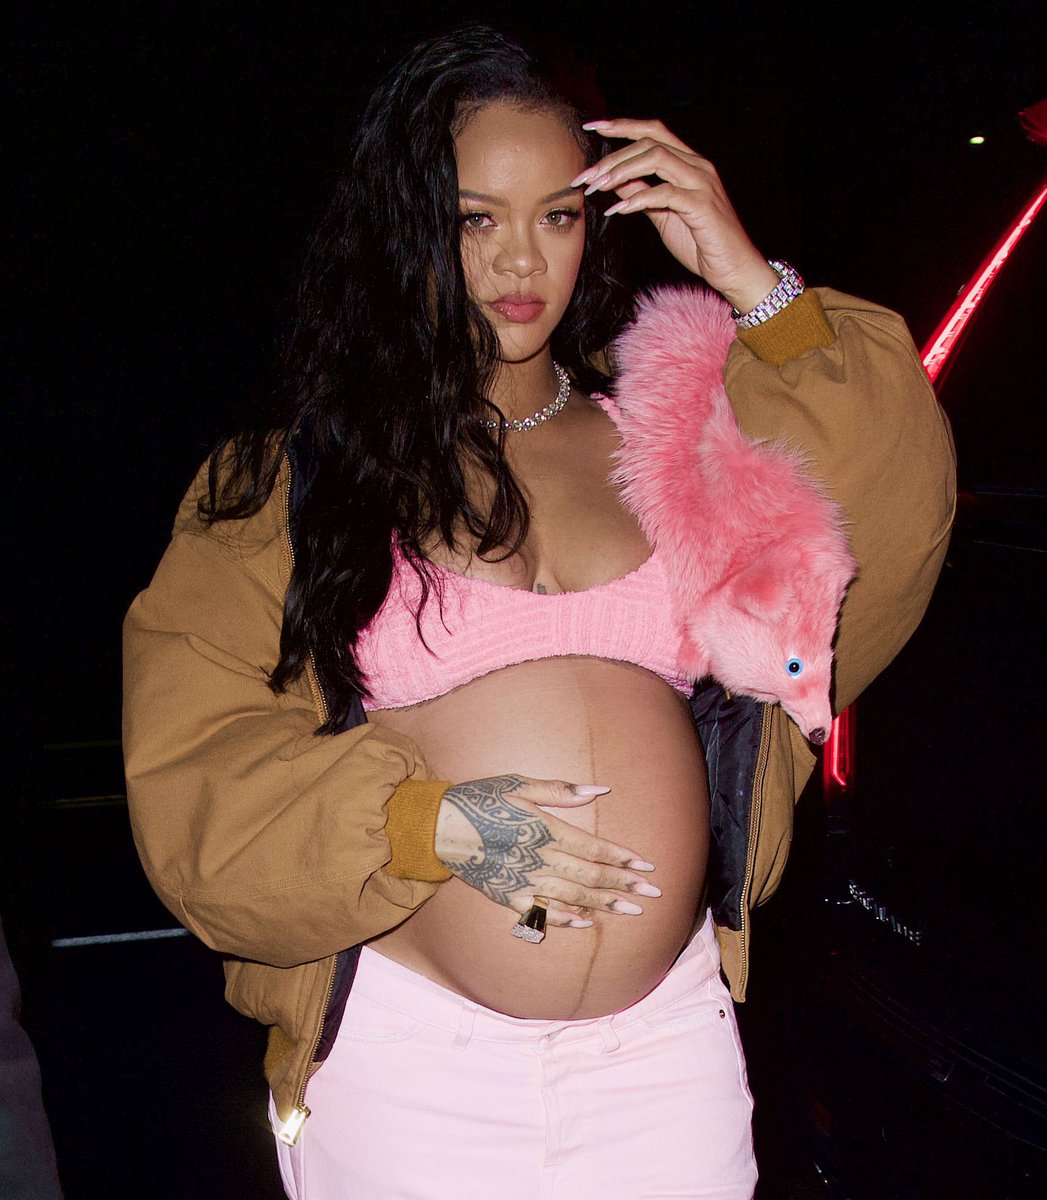 According to Media TakeOut, Rihanna has given birth to her second child, a baby girl.